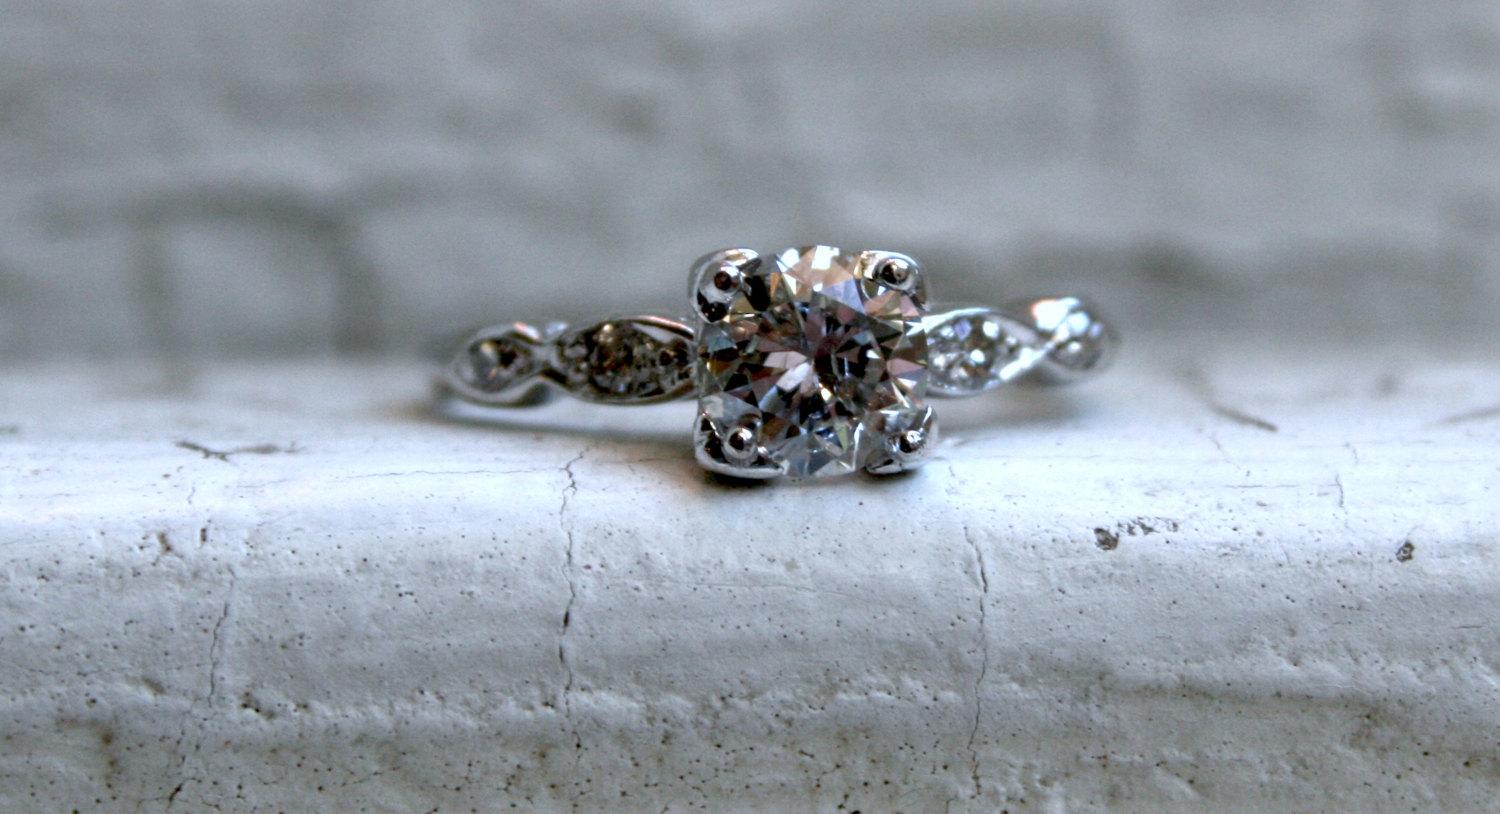 Sigh. I fell in love with this Fabulous Vintage Diamond Engagement Ring, and it is gorgeous! It's super sparkle and classic lines had me at first glance. Crafted in Platinum, the design features a stunning center Antique Diamond, with wonderful